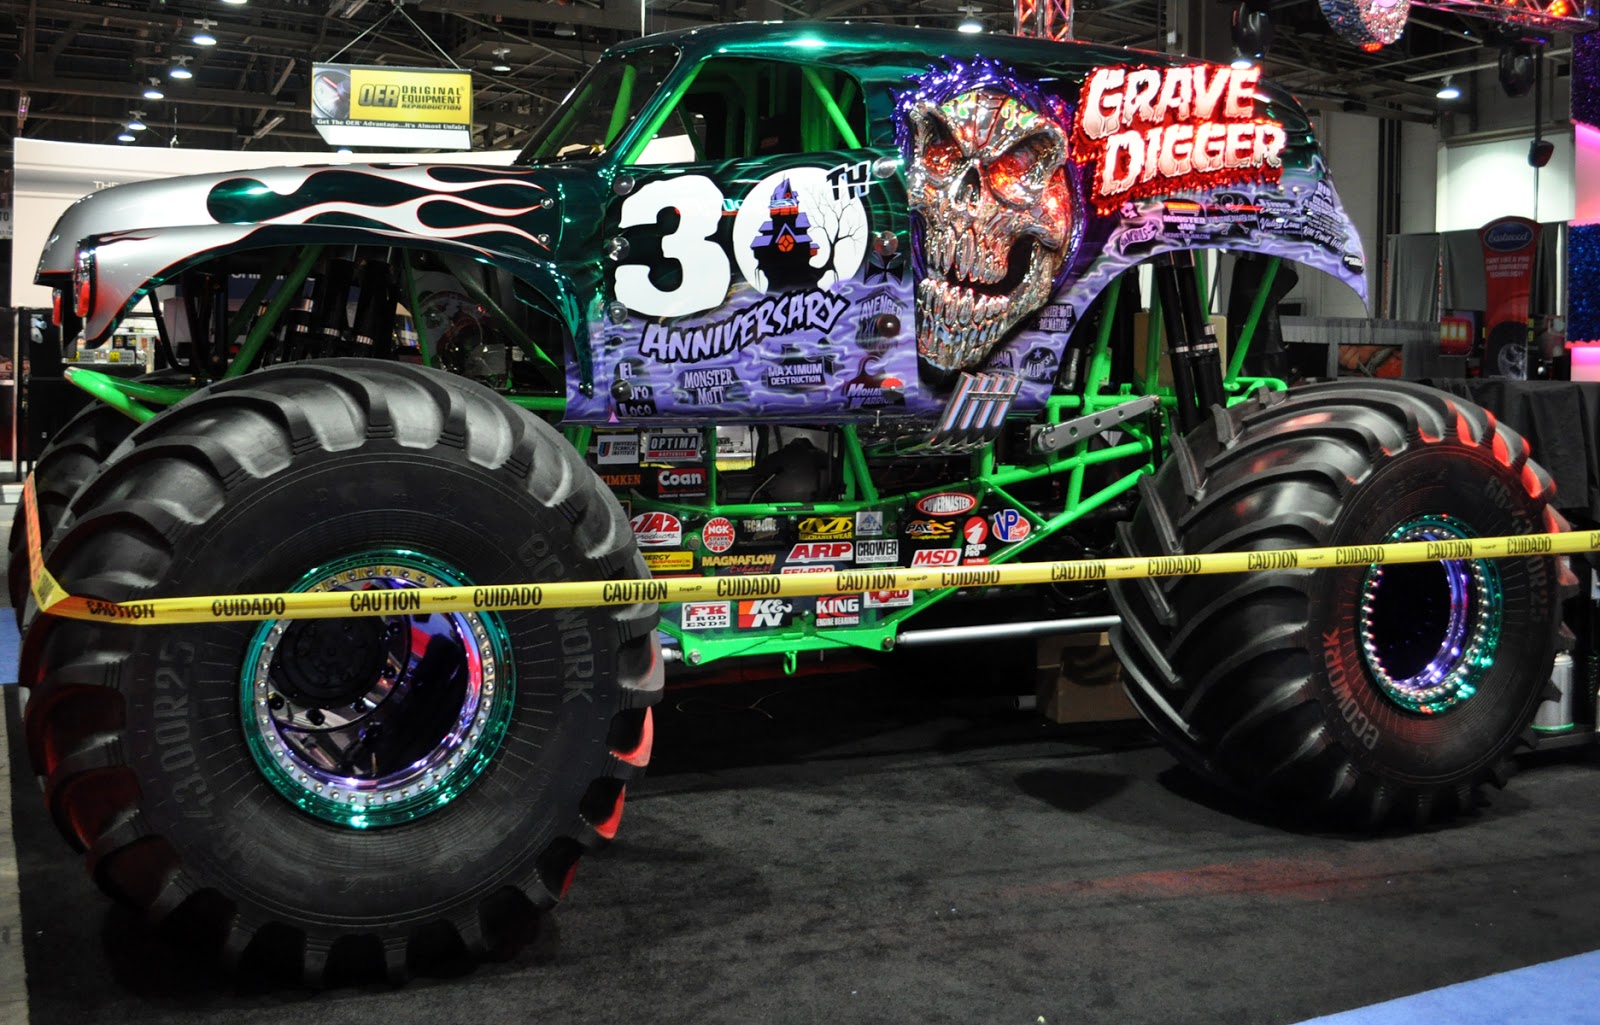 Grave Digger... the metallic chome paint is killer.